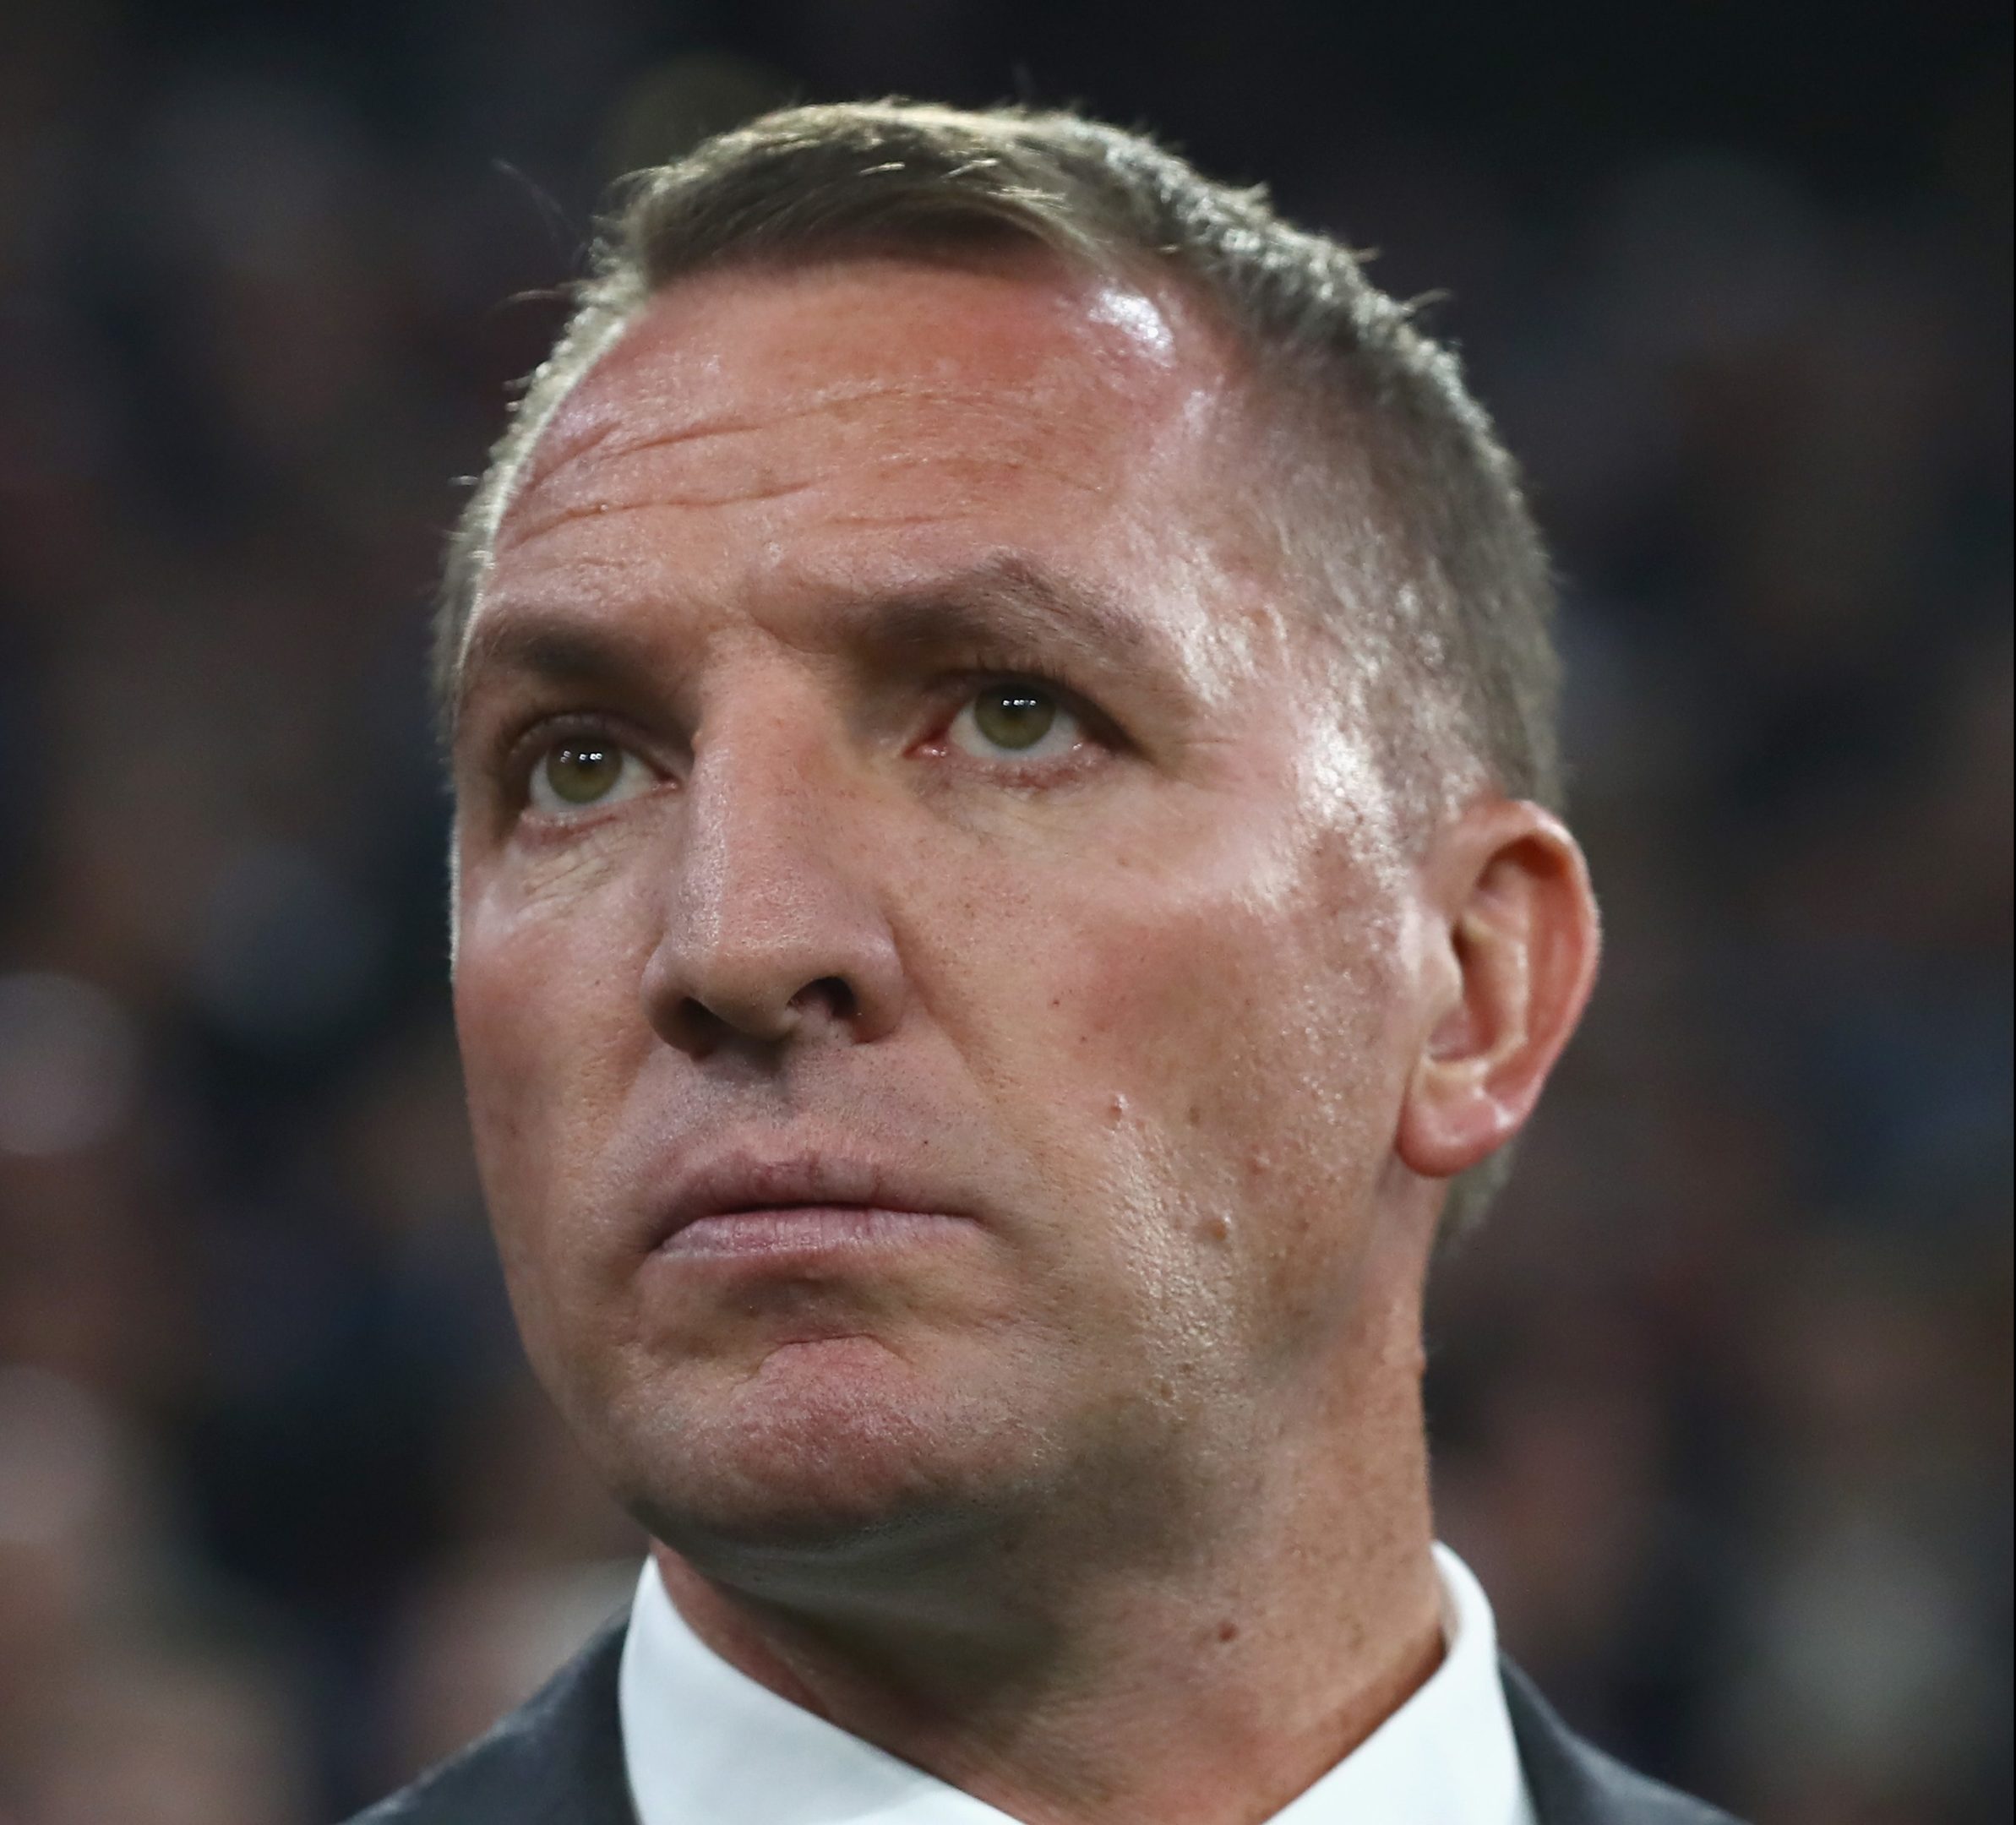 Brendan Rodgers manager of Celtic (Alexander Hassenstein/Bongarts/Getty Images)